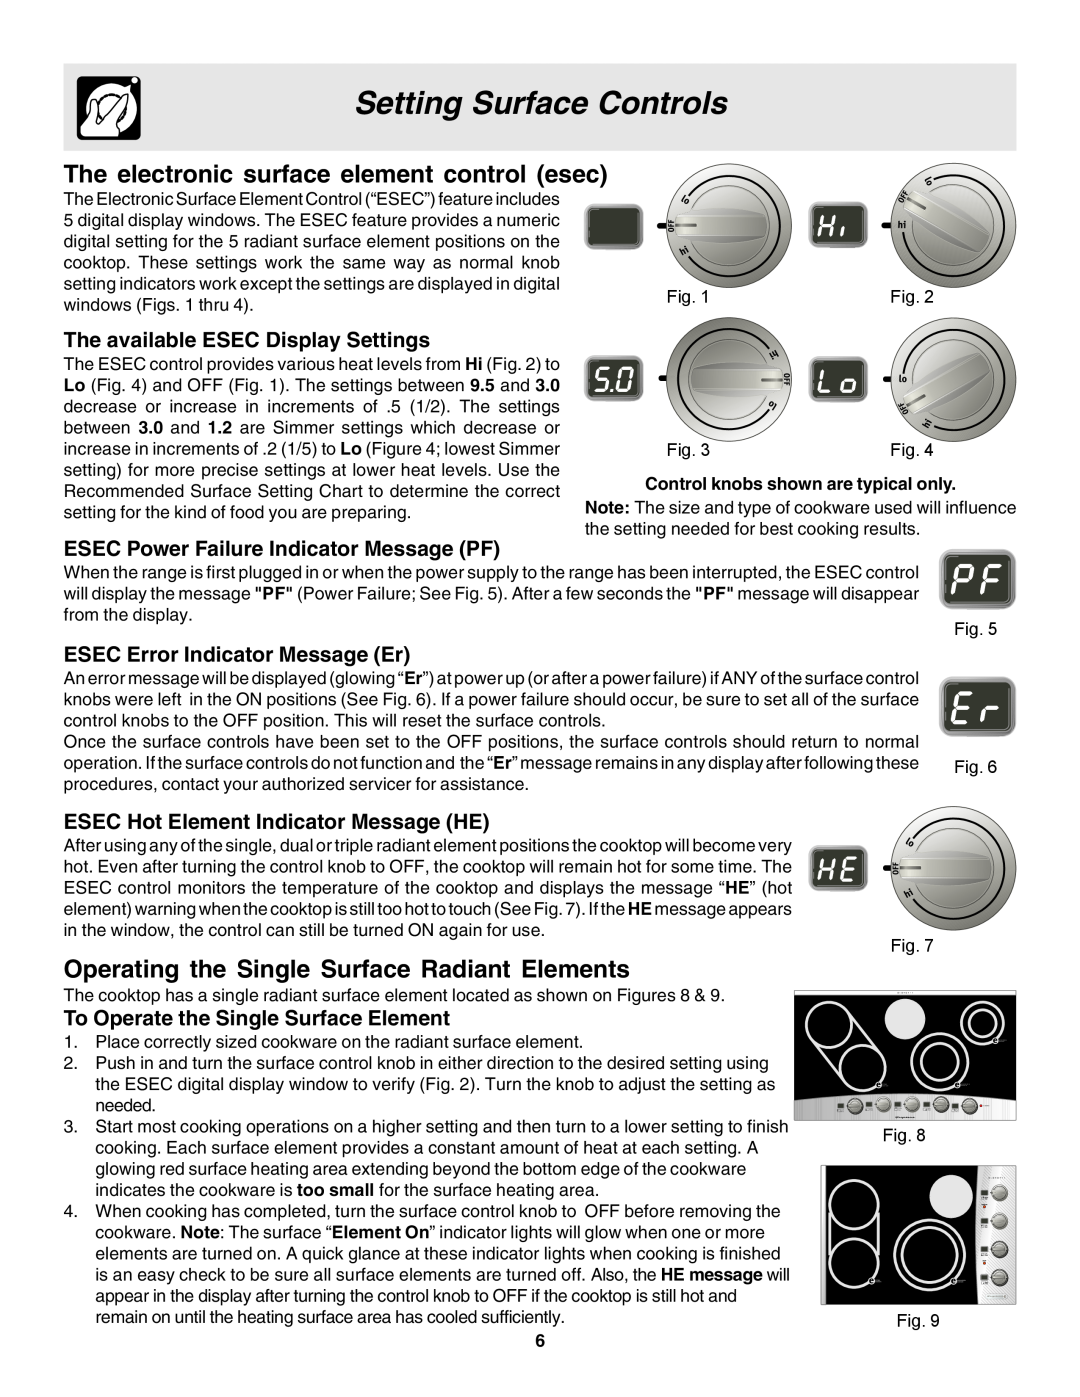 Frigidaire 318200633 warranty The electronic surface element control esec, Operating the Single Surface Radiant Elements 